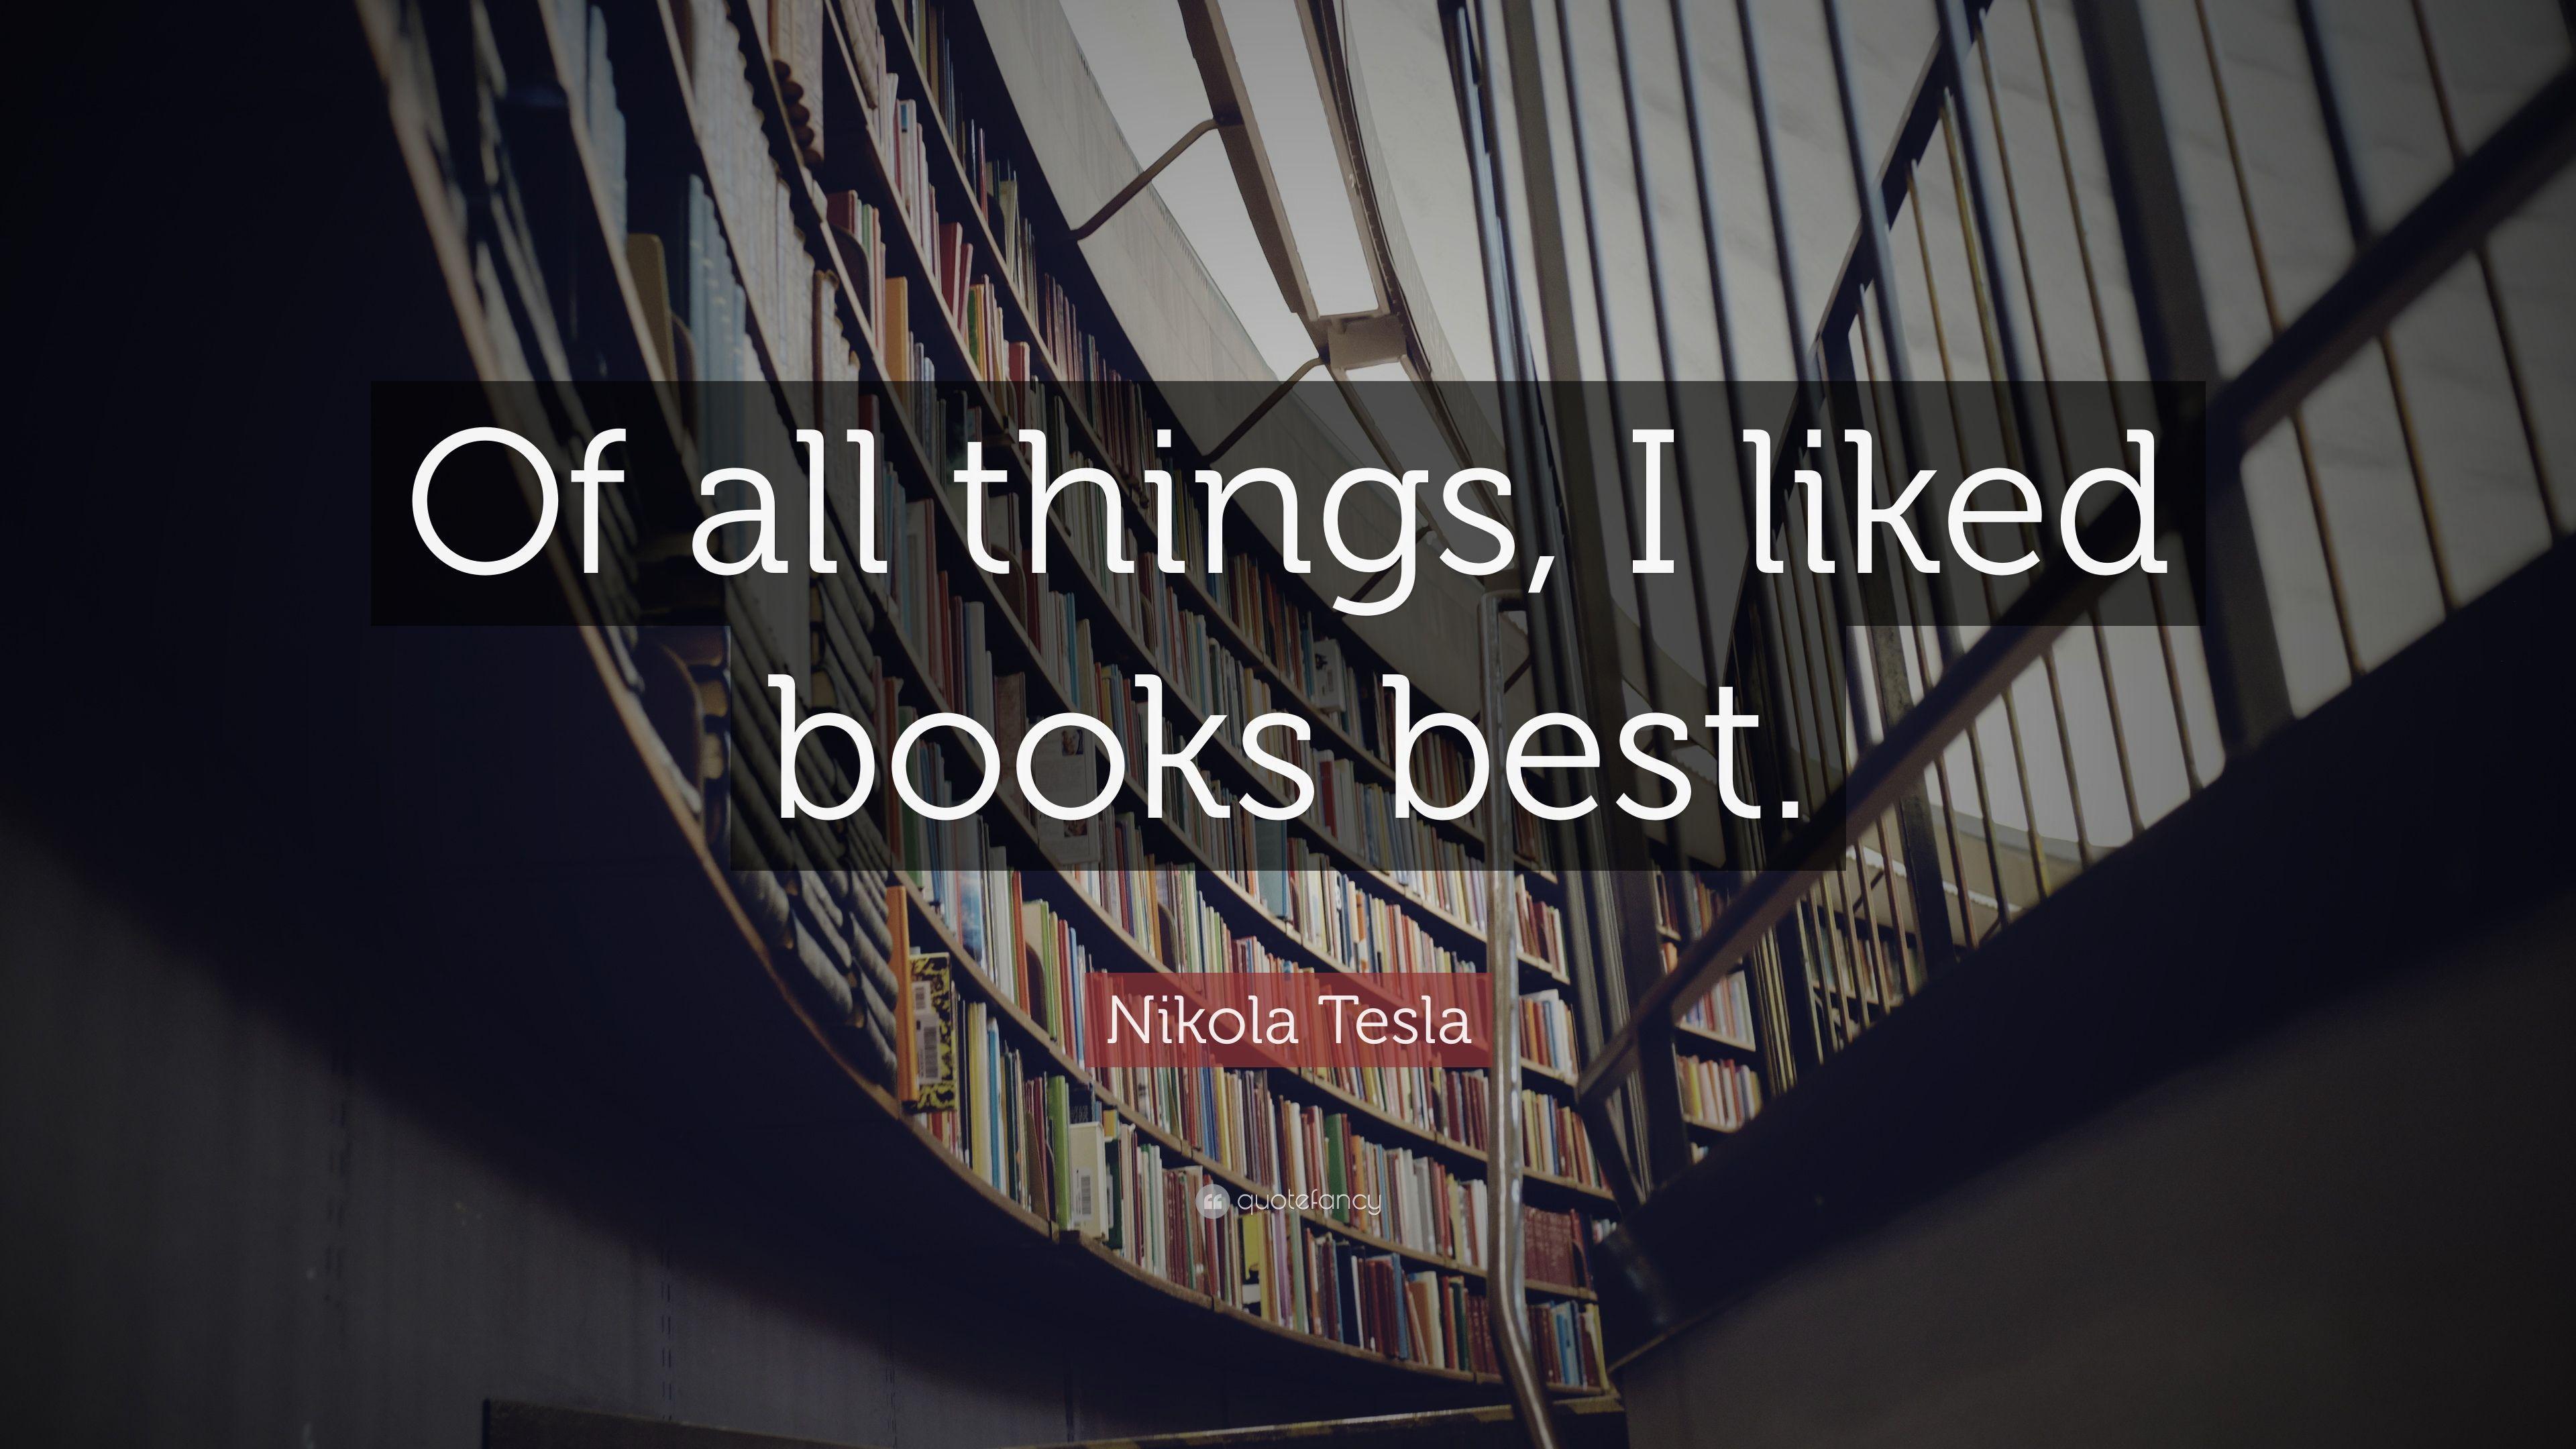 Nikola Tesla Quote: “Of all things, I liked books best.” 11